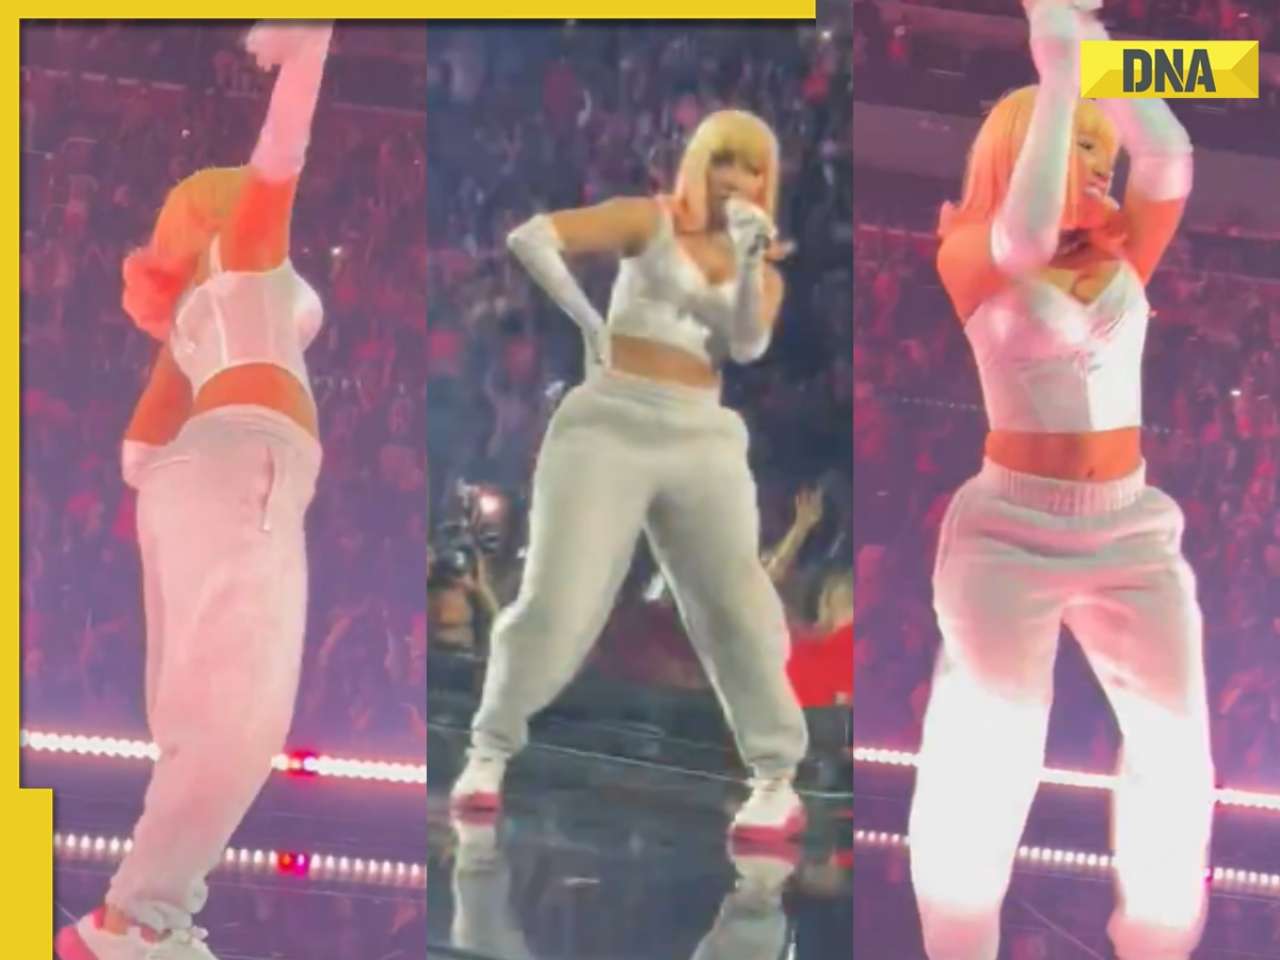 Watch: Nicki Minaj almost gets hit by object on stage during Detroit show, throws it back into crowd; video goes viral